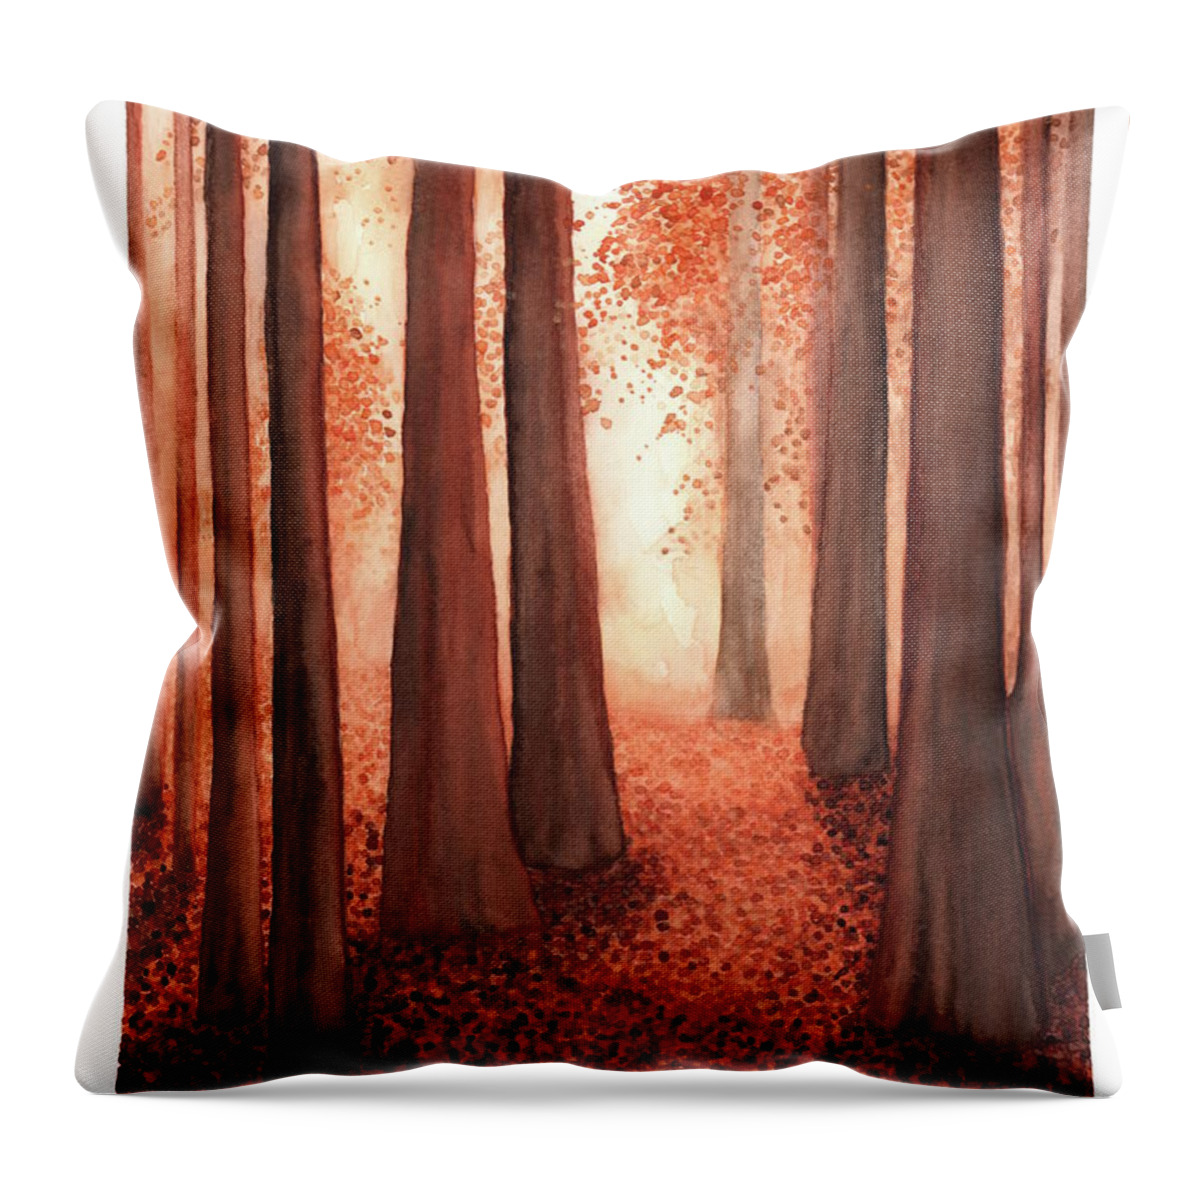 Redwoods Throw Pillow featuring the painting A Walk in the Redwoods by Hilda Wagner